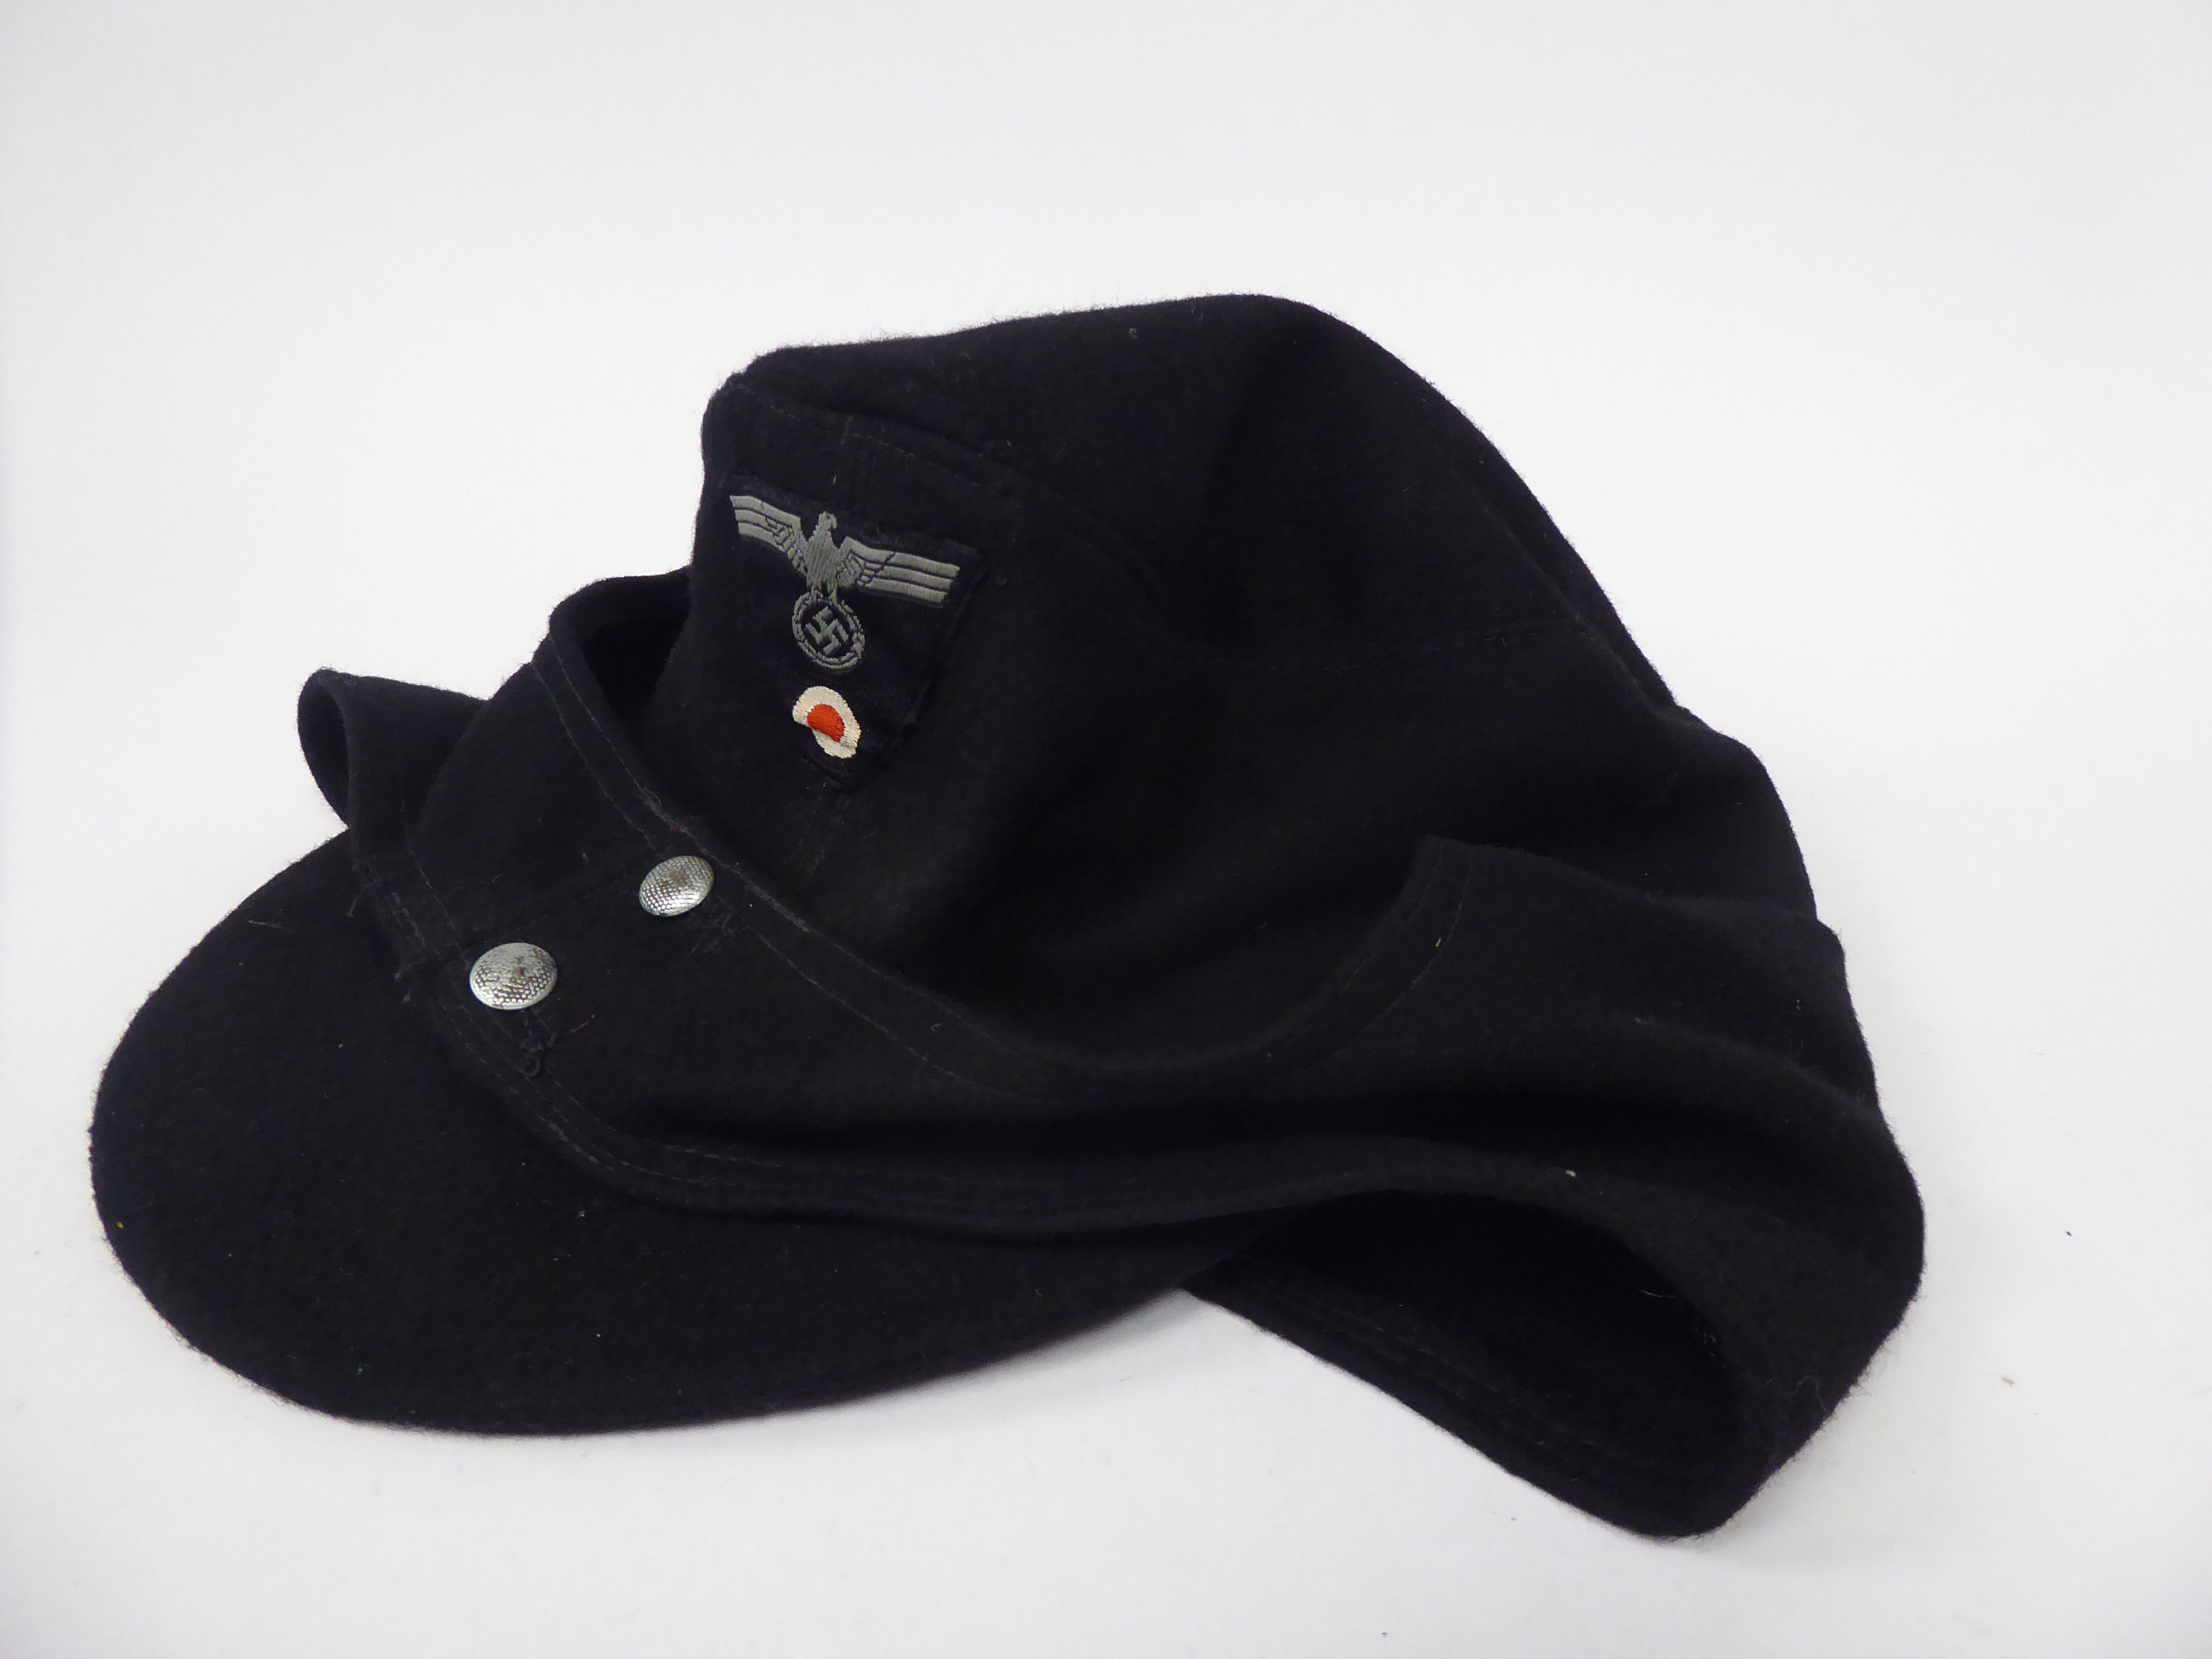 A German army black ski cap with a woven spreadeagle and swastika emblem (Please Note: this lot is